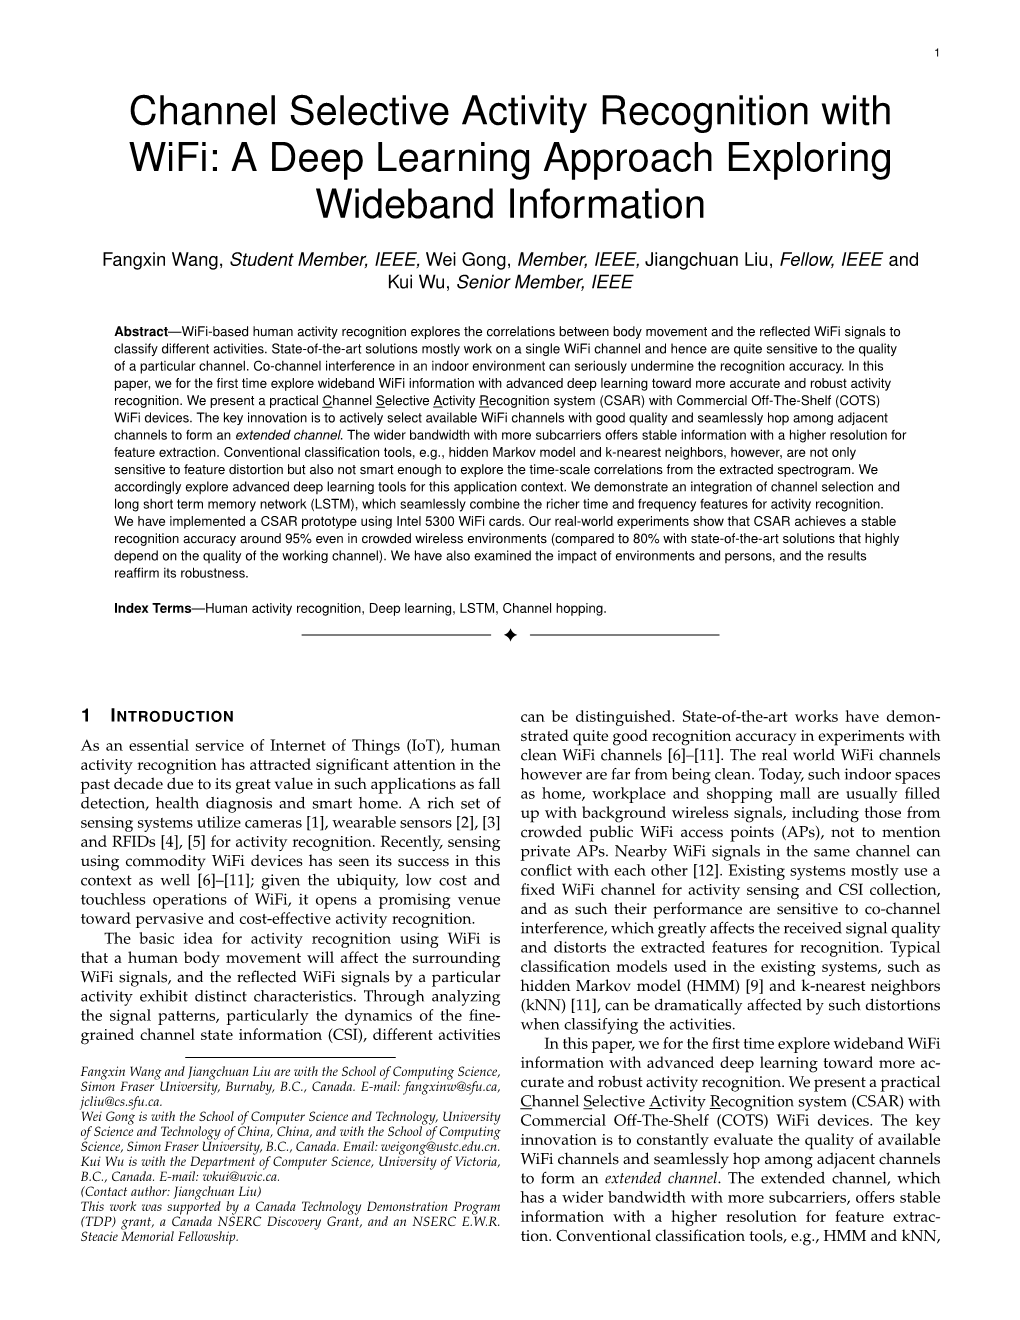 Channel Selective Activity Recognition with Wifi: a Deep Learning Approach Exploring Wideband Information